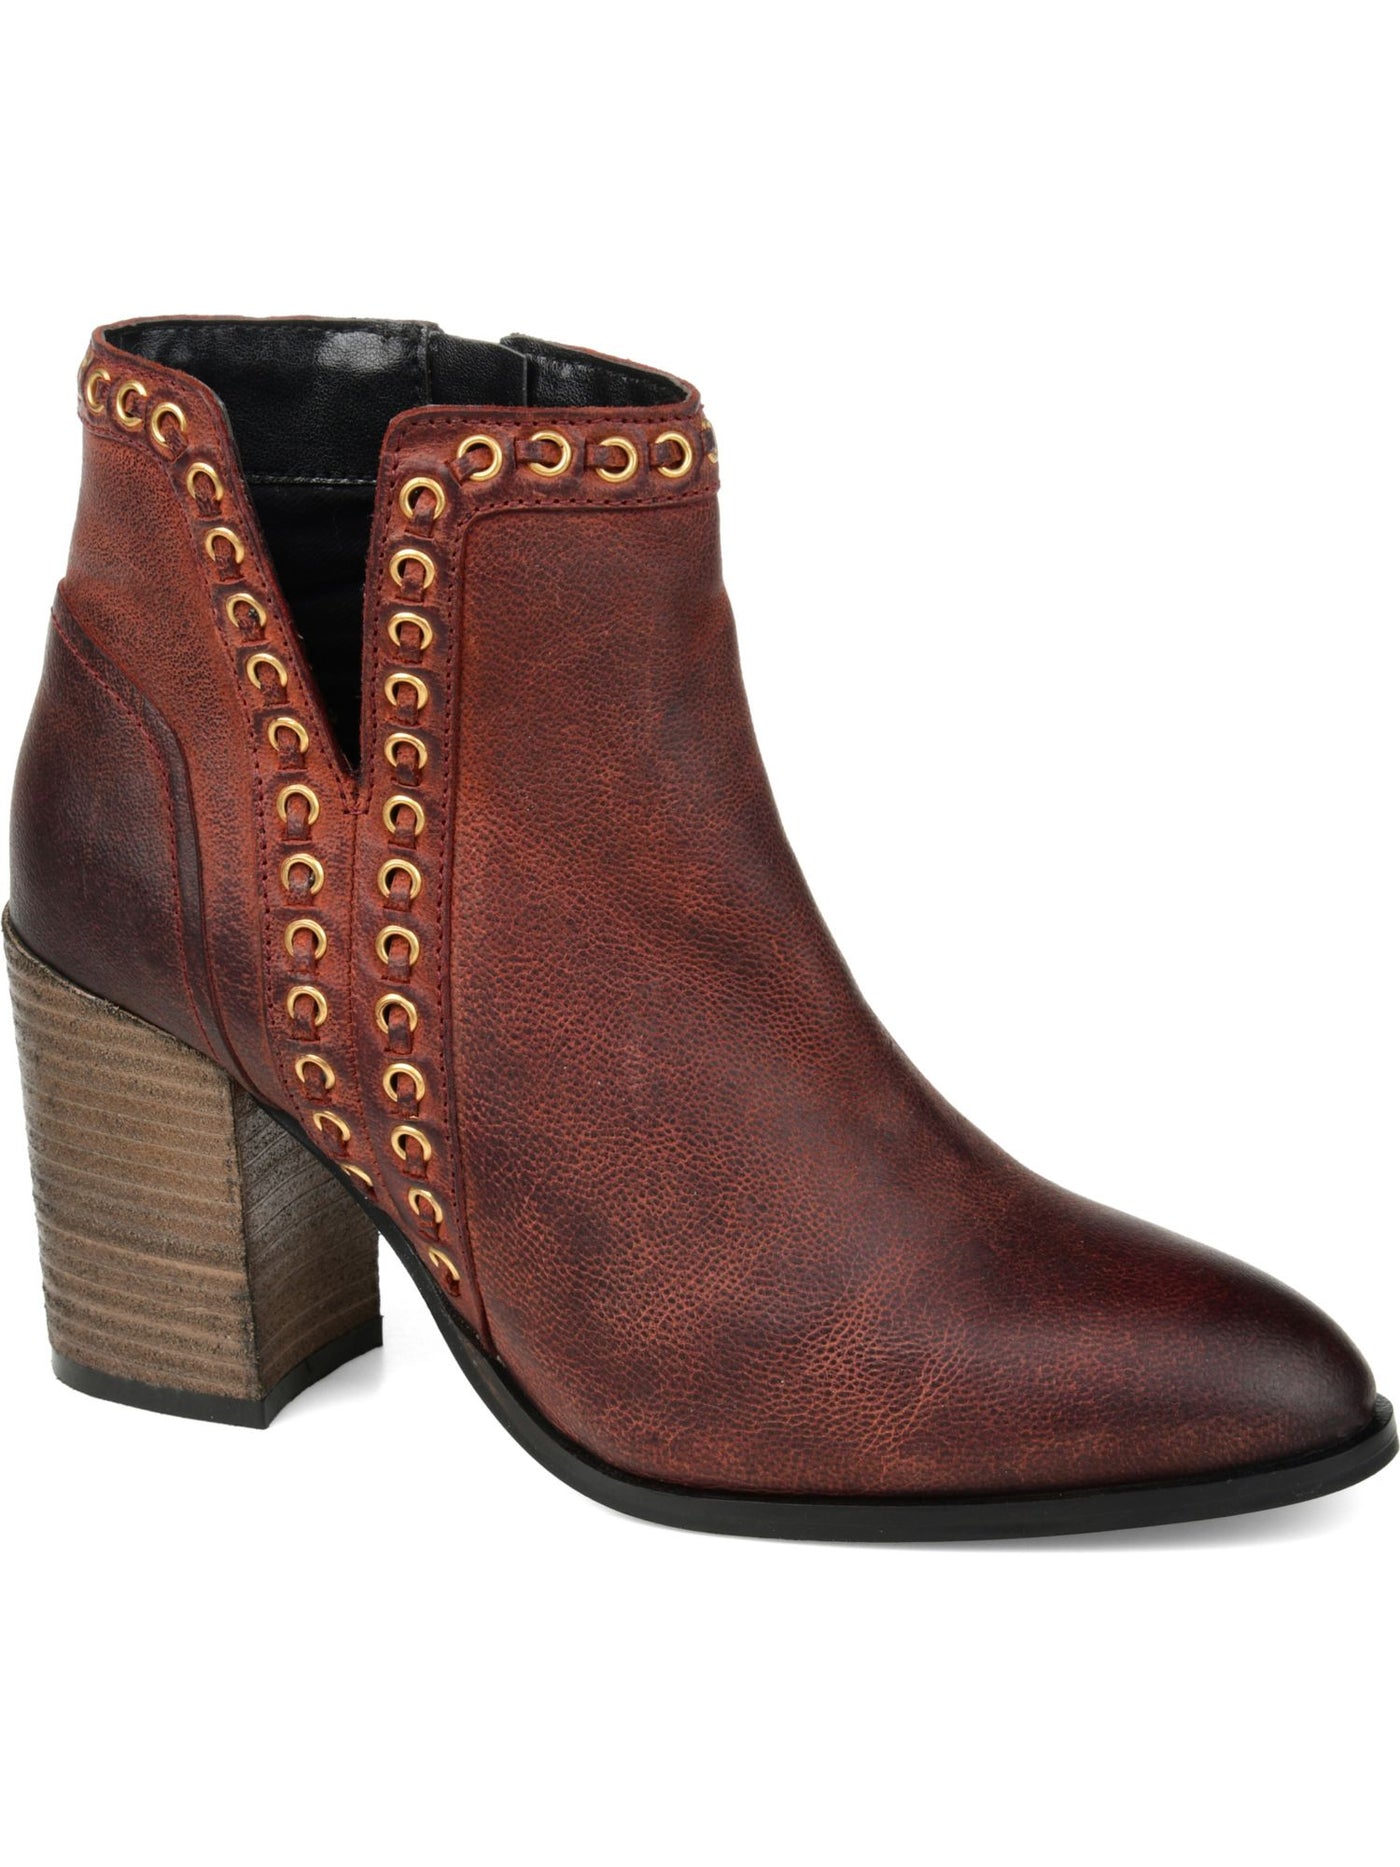 JOURNEE SIGNATURE Womens Brown Lace And Eyelet Detail Padded Jorri Almond Toe Stacked Heel Zip-Up Leather Booties 10